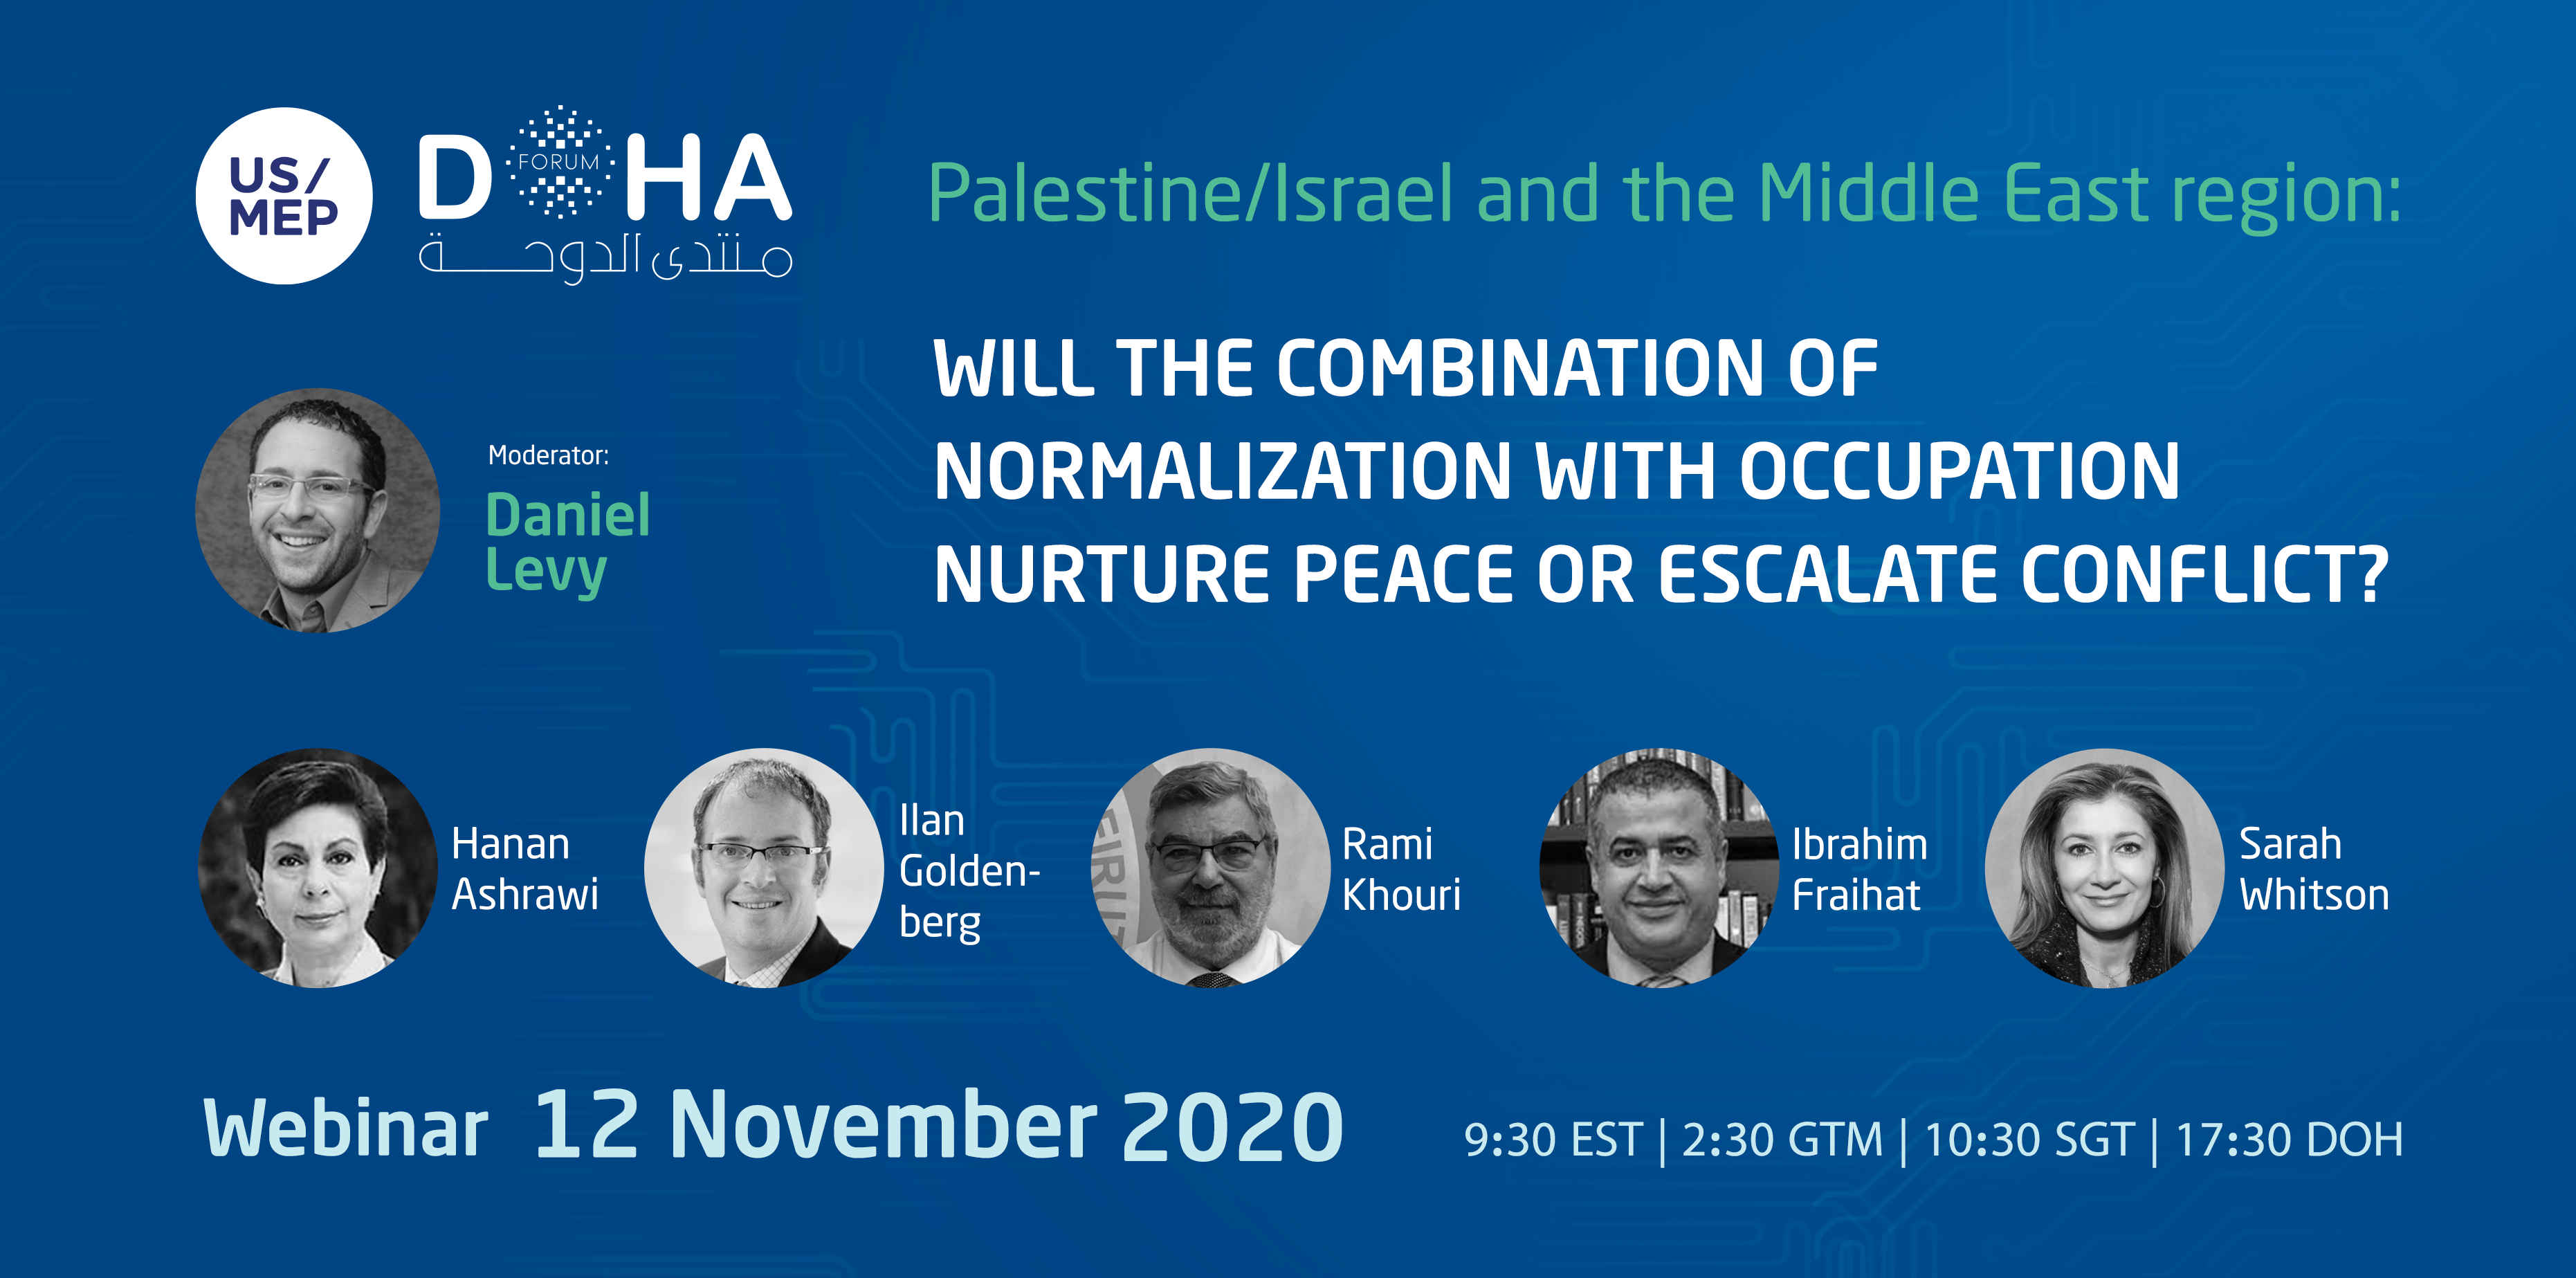 Will the combination of normalization with occupation nurture peace or escalate conflict?